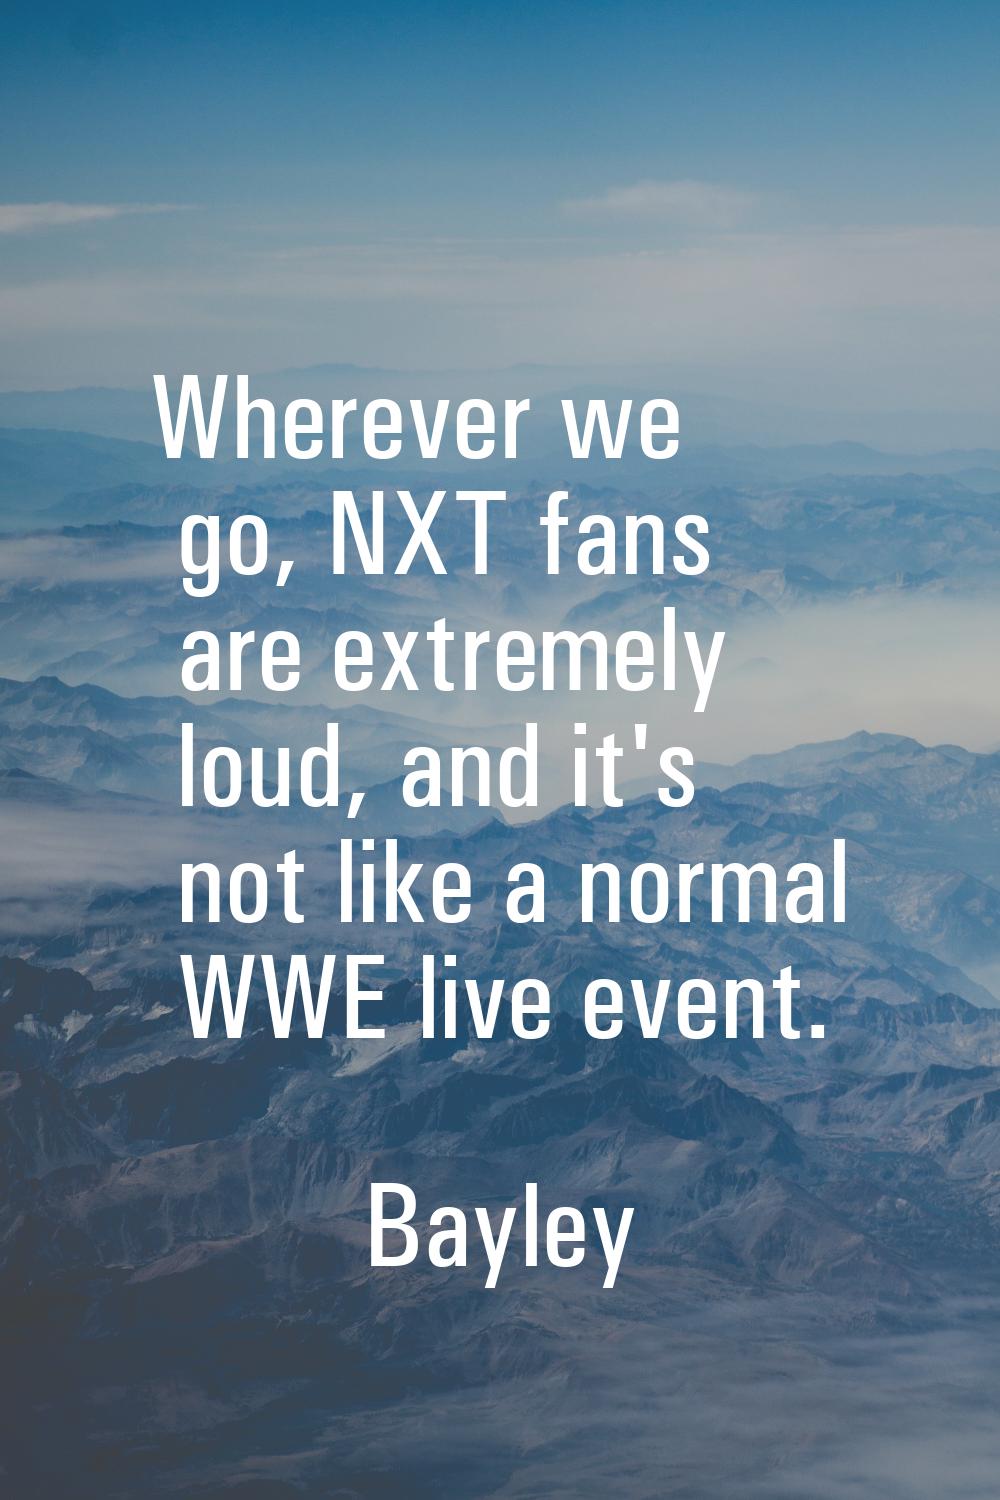 Wherever we go, NXT fans are extremely loud, and it's not like a normal WWE live event.